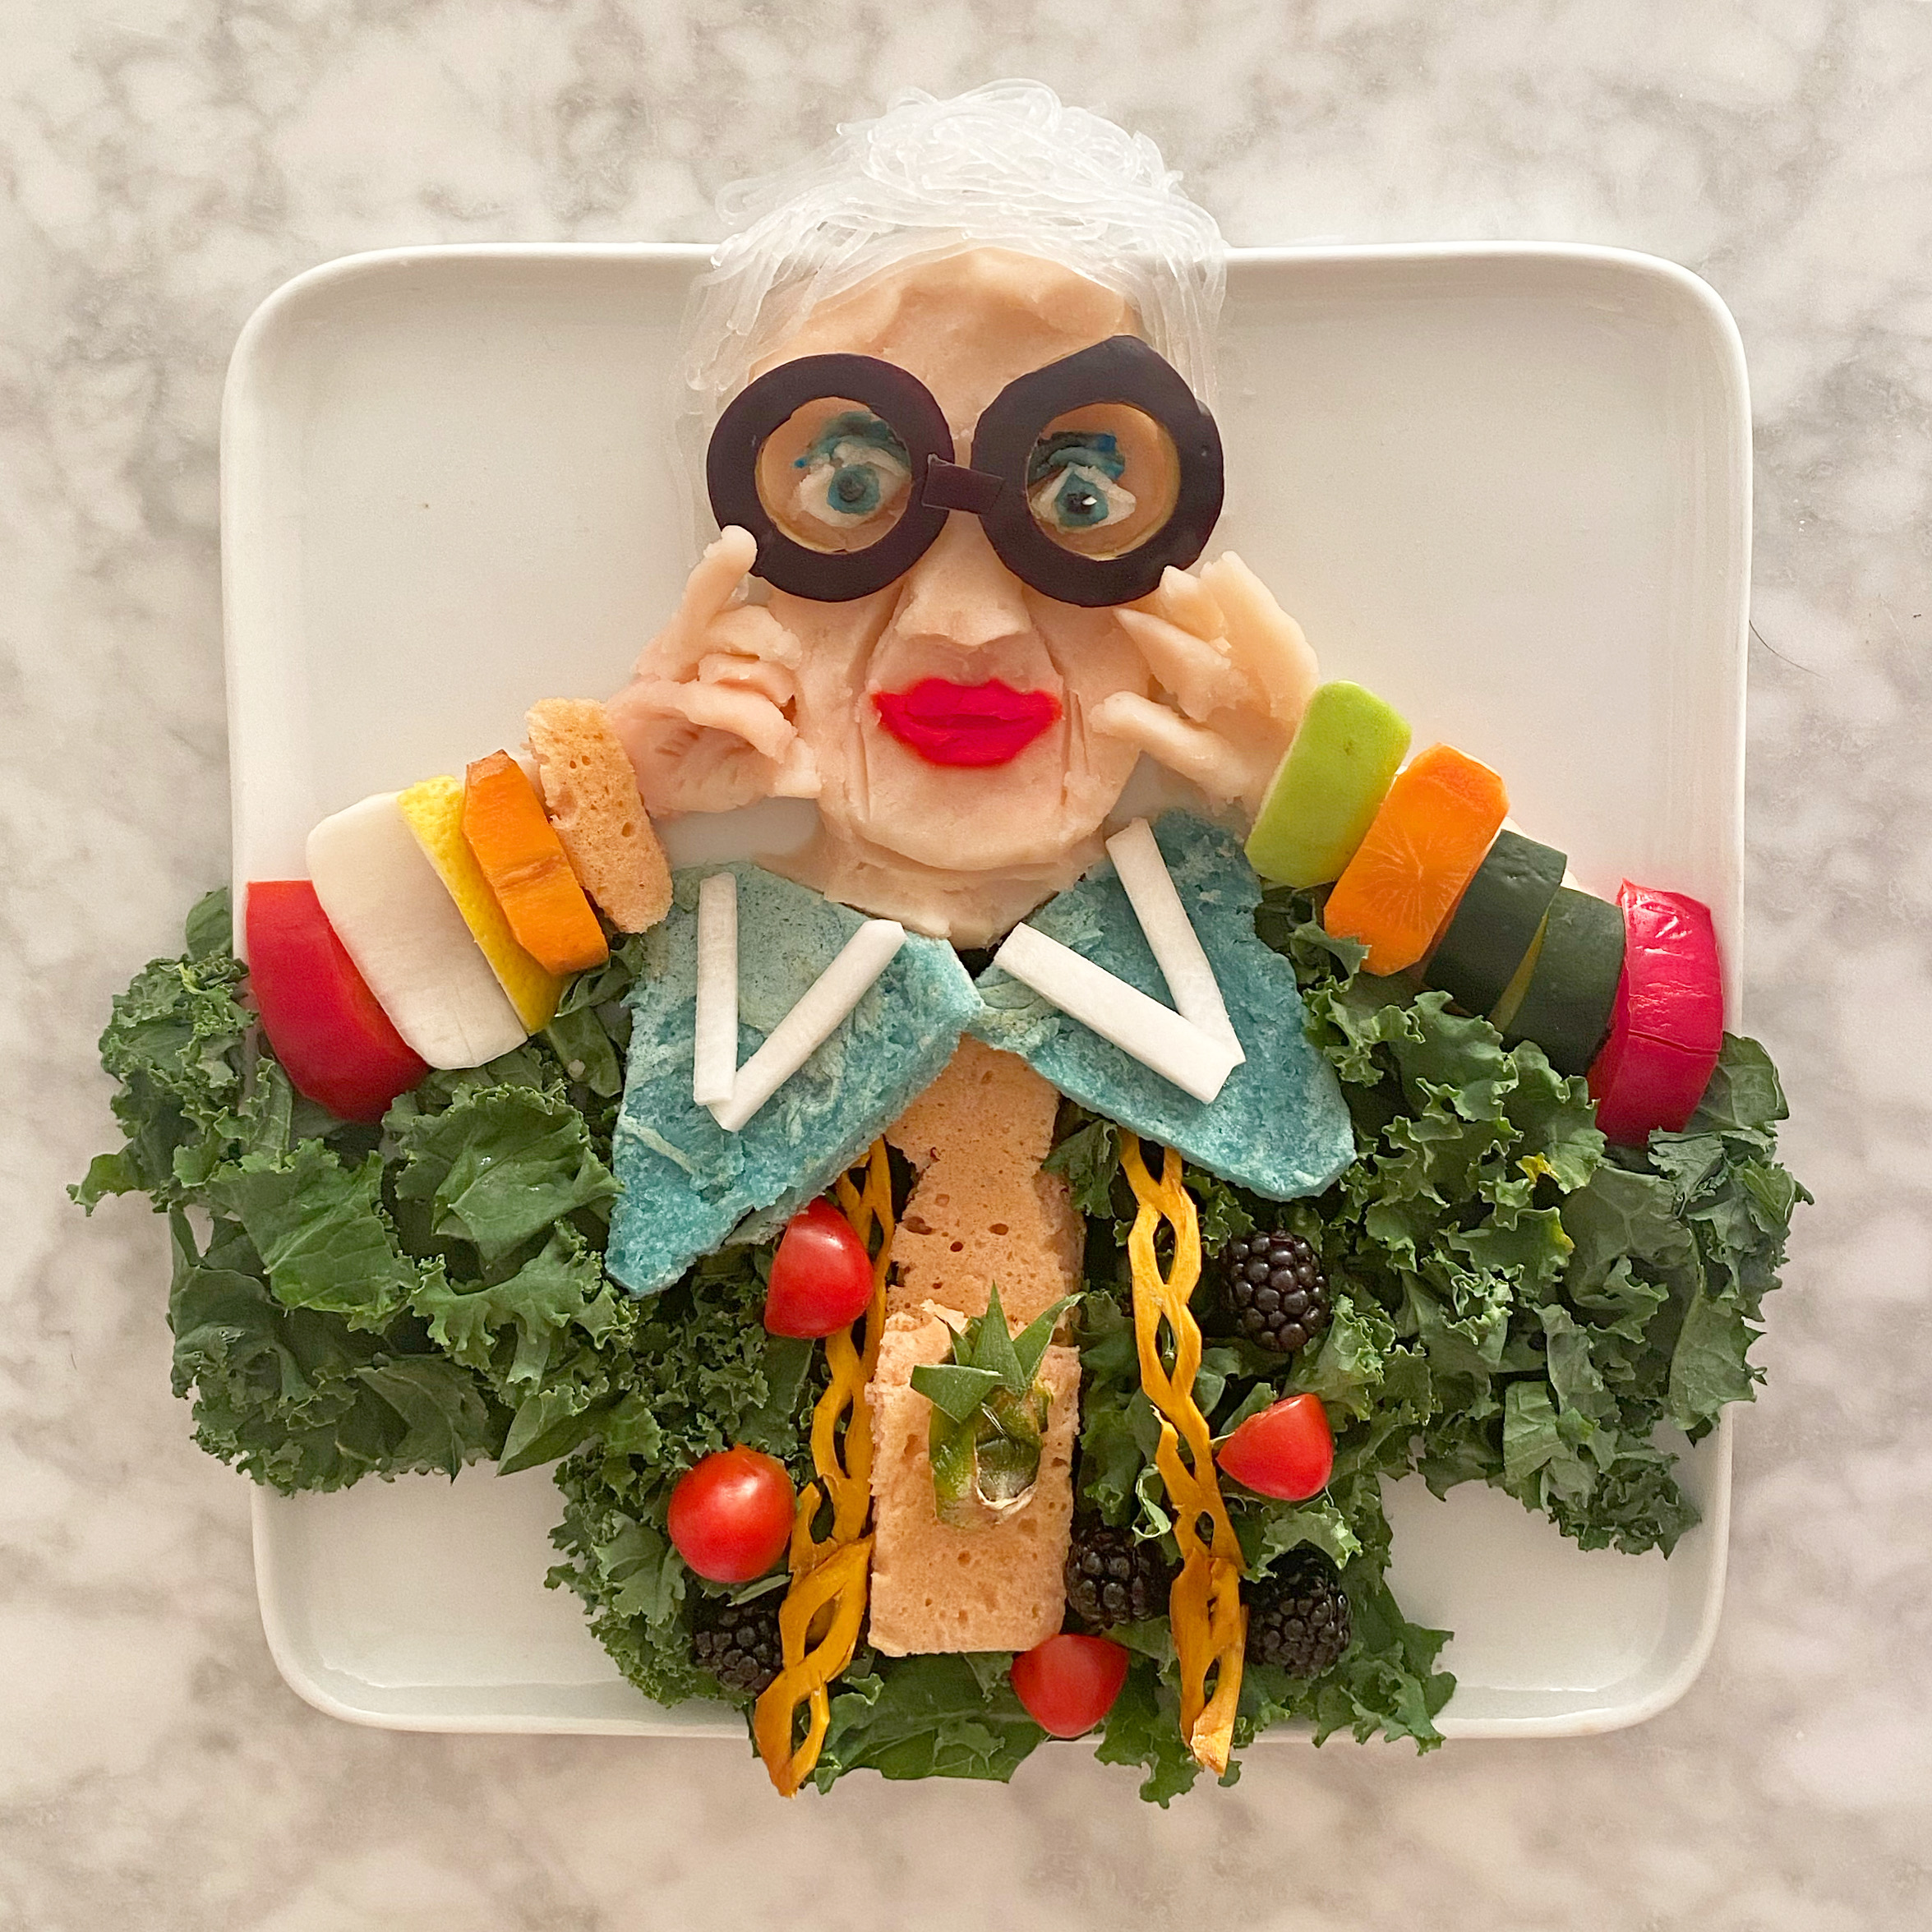 Iris Apfel – mashed potatoes, kale, dried mango, red pepper, cherry tomatoes, blackberries, turnip, rice noodles, dyed pancake, cucumber, carrot, apple, and pineapple by Harley Langberg